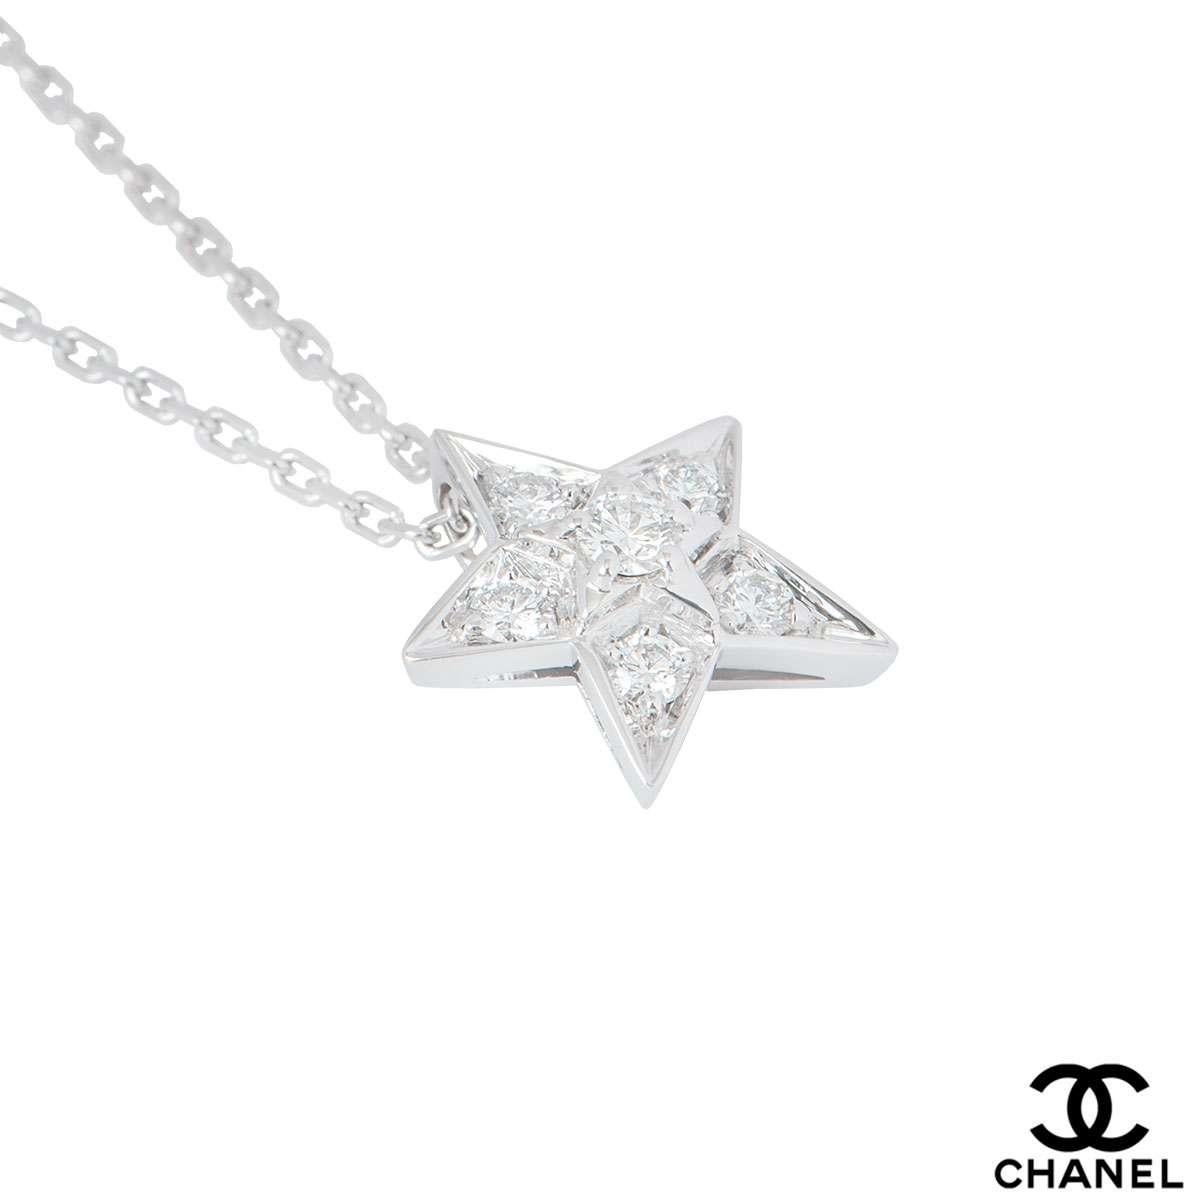 An 18k white gold star pendant by Chanel from the Comete collection. The pendant features a star motif with 6 round brilliant cut diamonds in total with 1 in the centre on a smaller star all in a claw setting with a total weight of 0.22ct. The